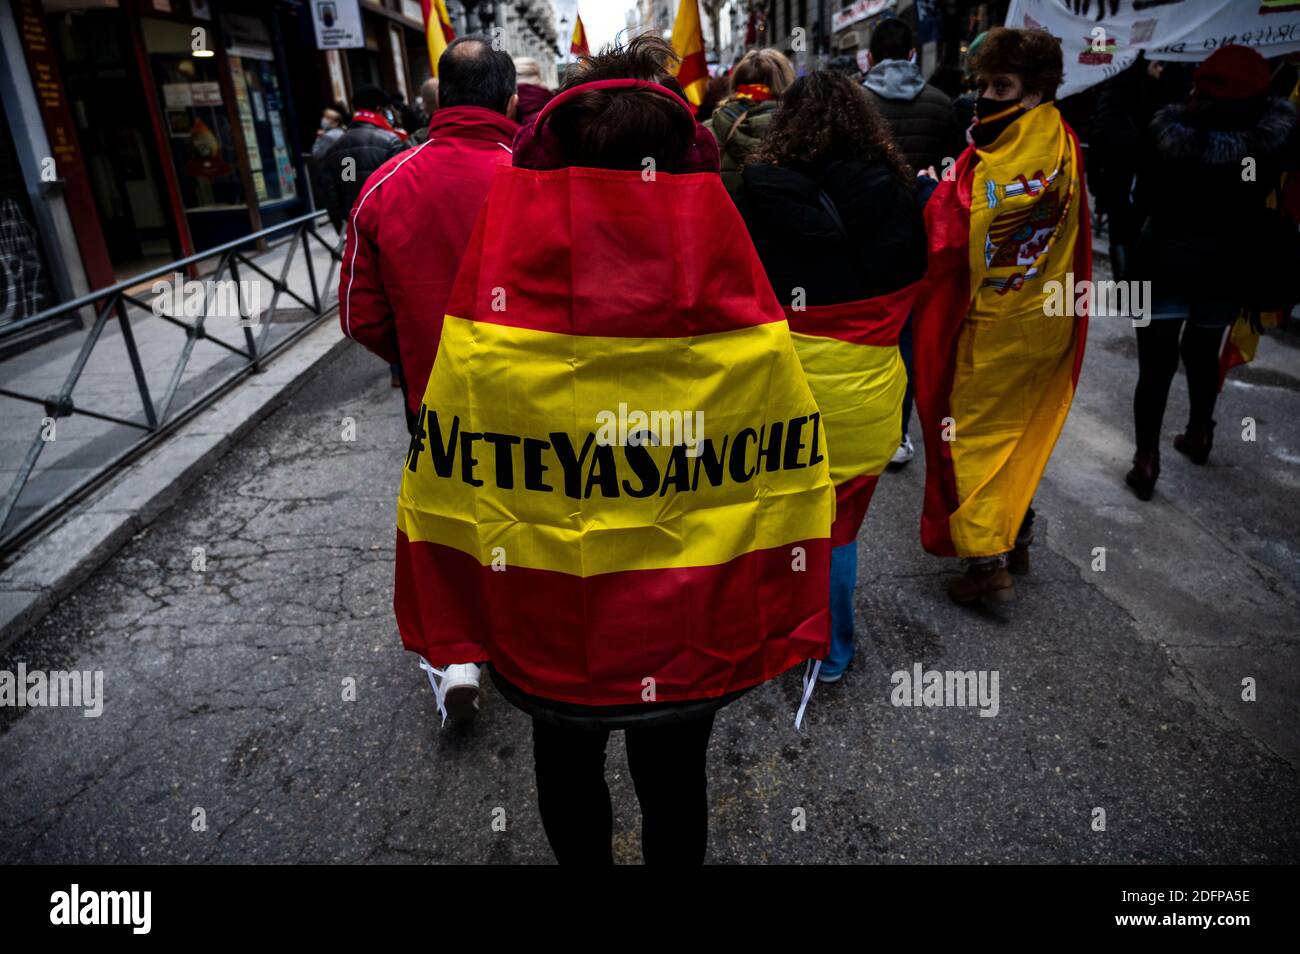 Madrid, Spain. 06th Dec, 2020. A protester wearing a Spanish flag with the words 'Sanchez go away now' during a demonstration marching to the Congress of Deputies to protest against the Government and demanding the resignation of President Pedro Sanchez coinciding with the central act on the day of the celebration of the Spanish Constitution that is celebrated within the Congress of Deputies. Credit: Marcos del Mazo/Alamy Live News Stock Photo